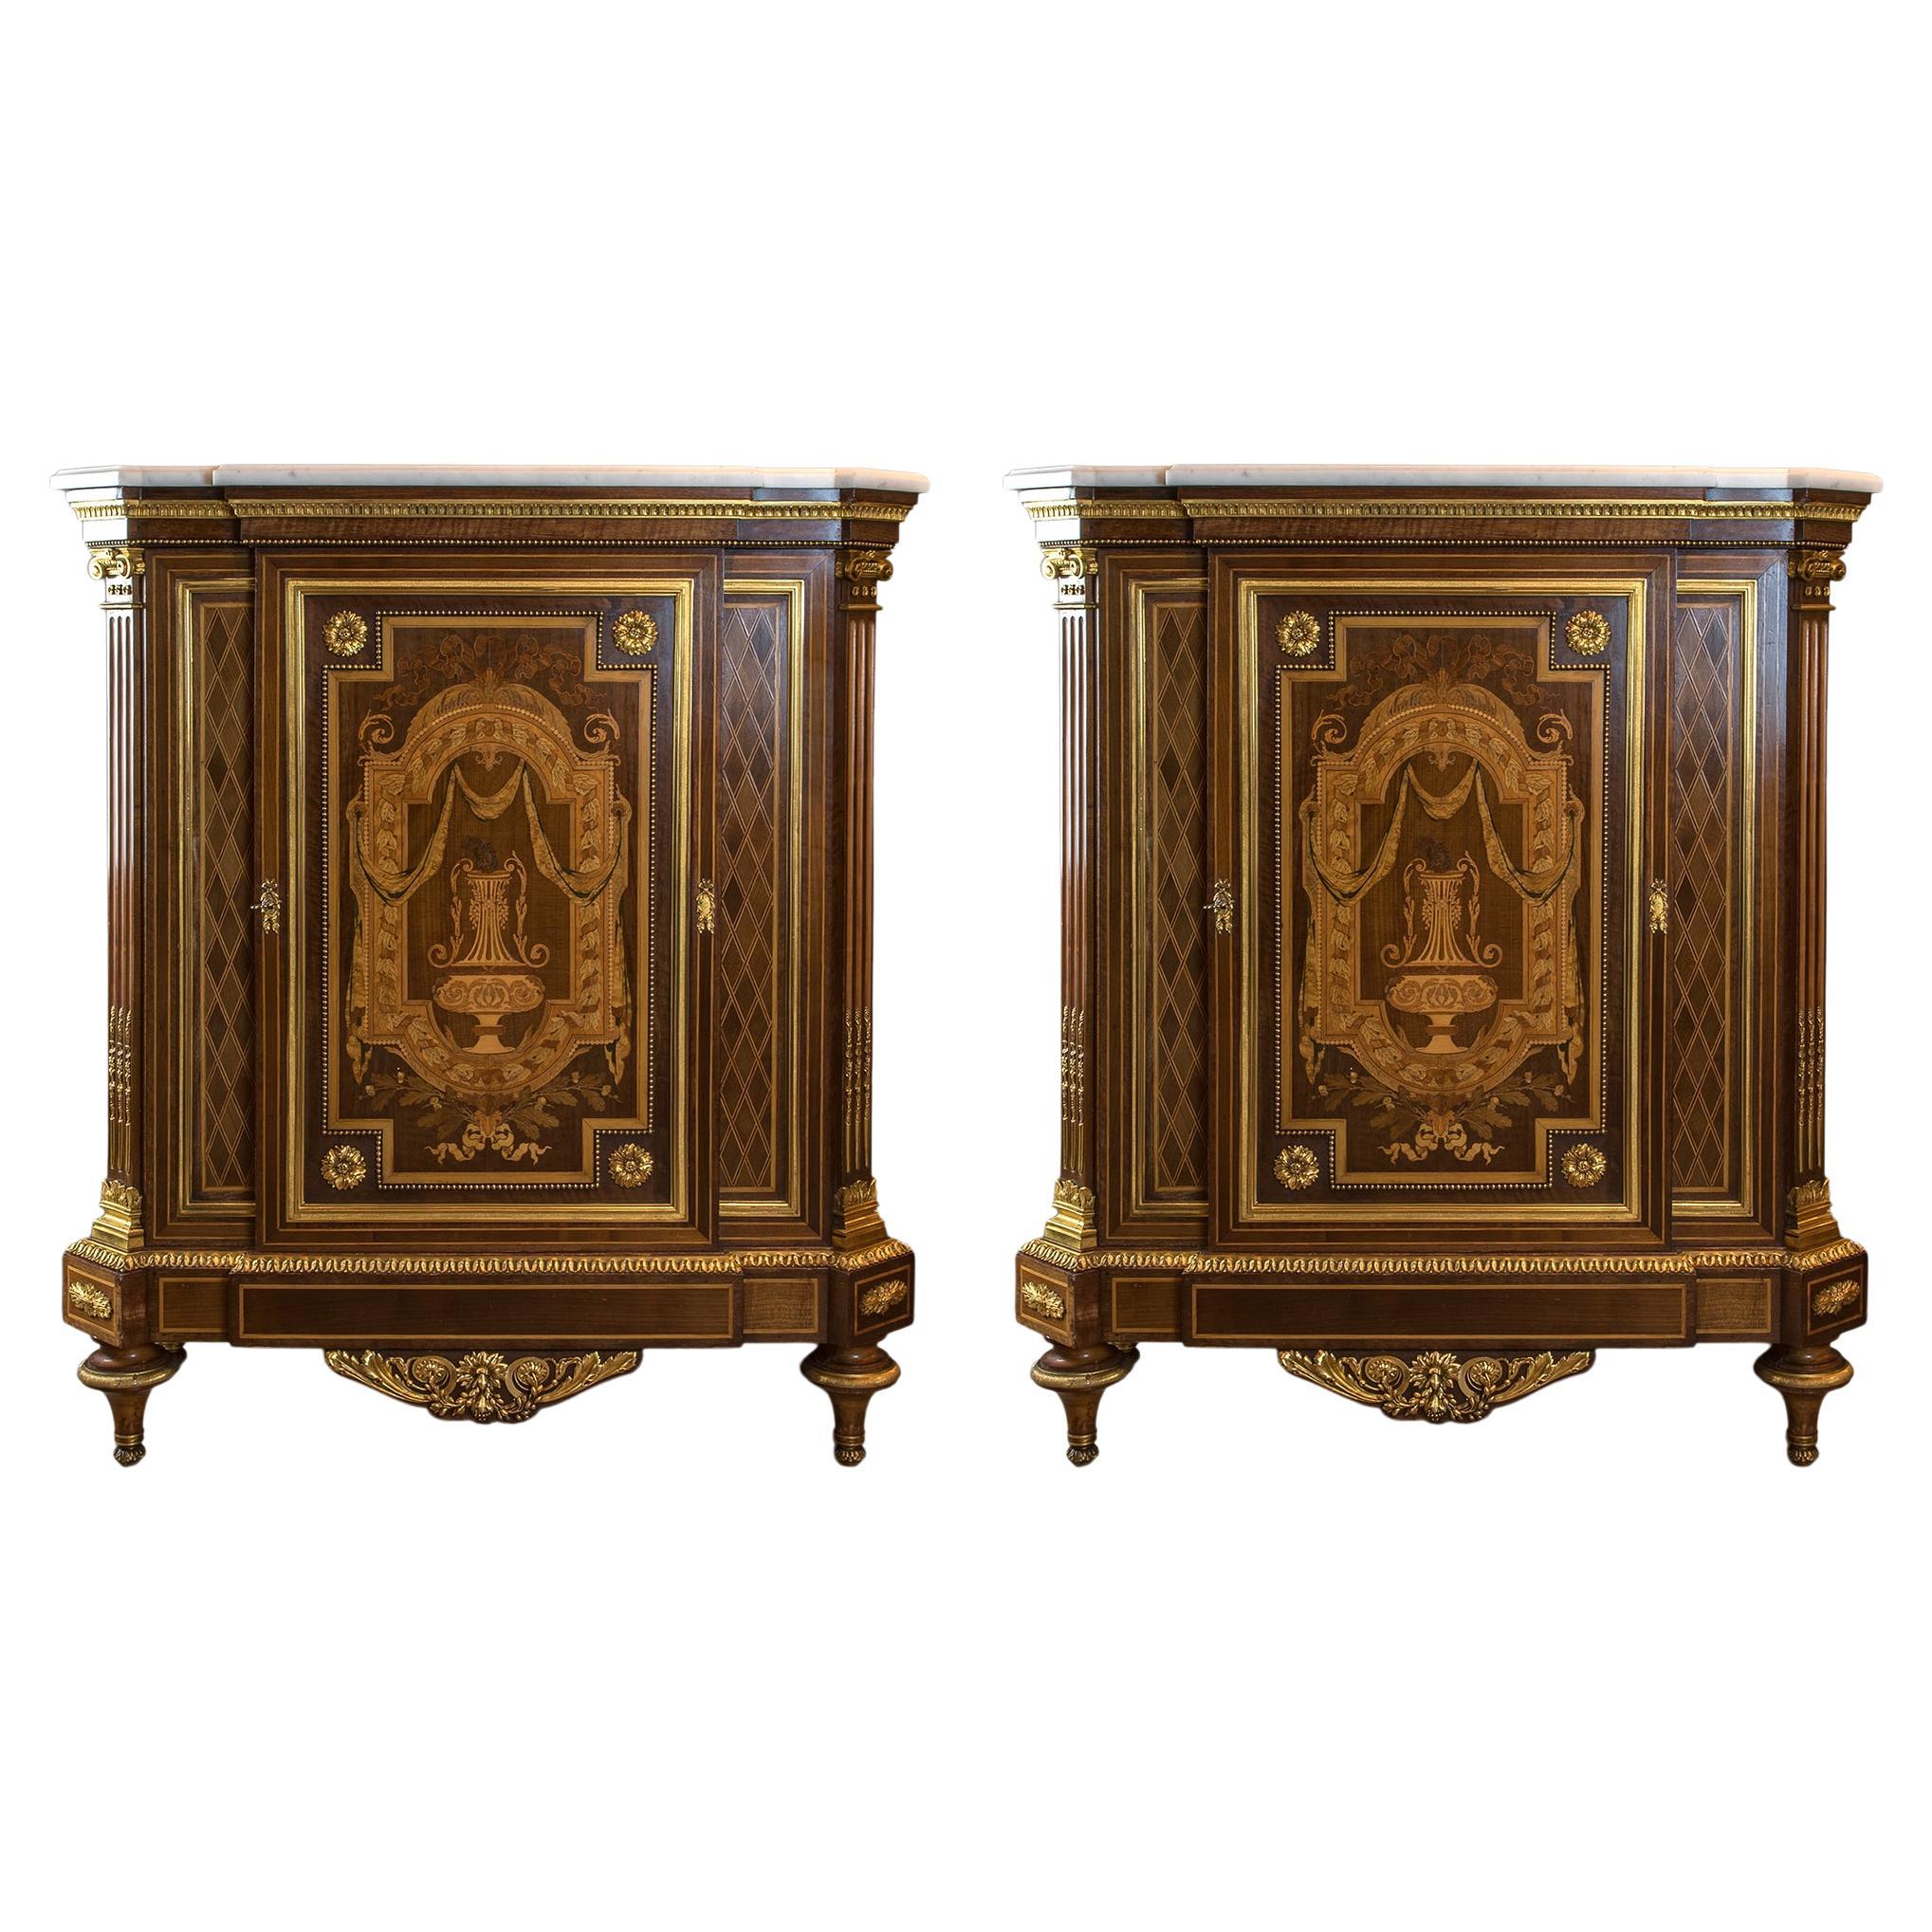 Pair of French Marquetry Fruitwood Marble-Top Commodes